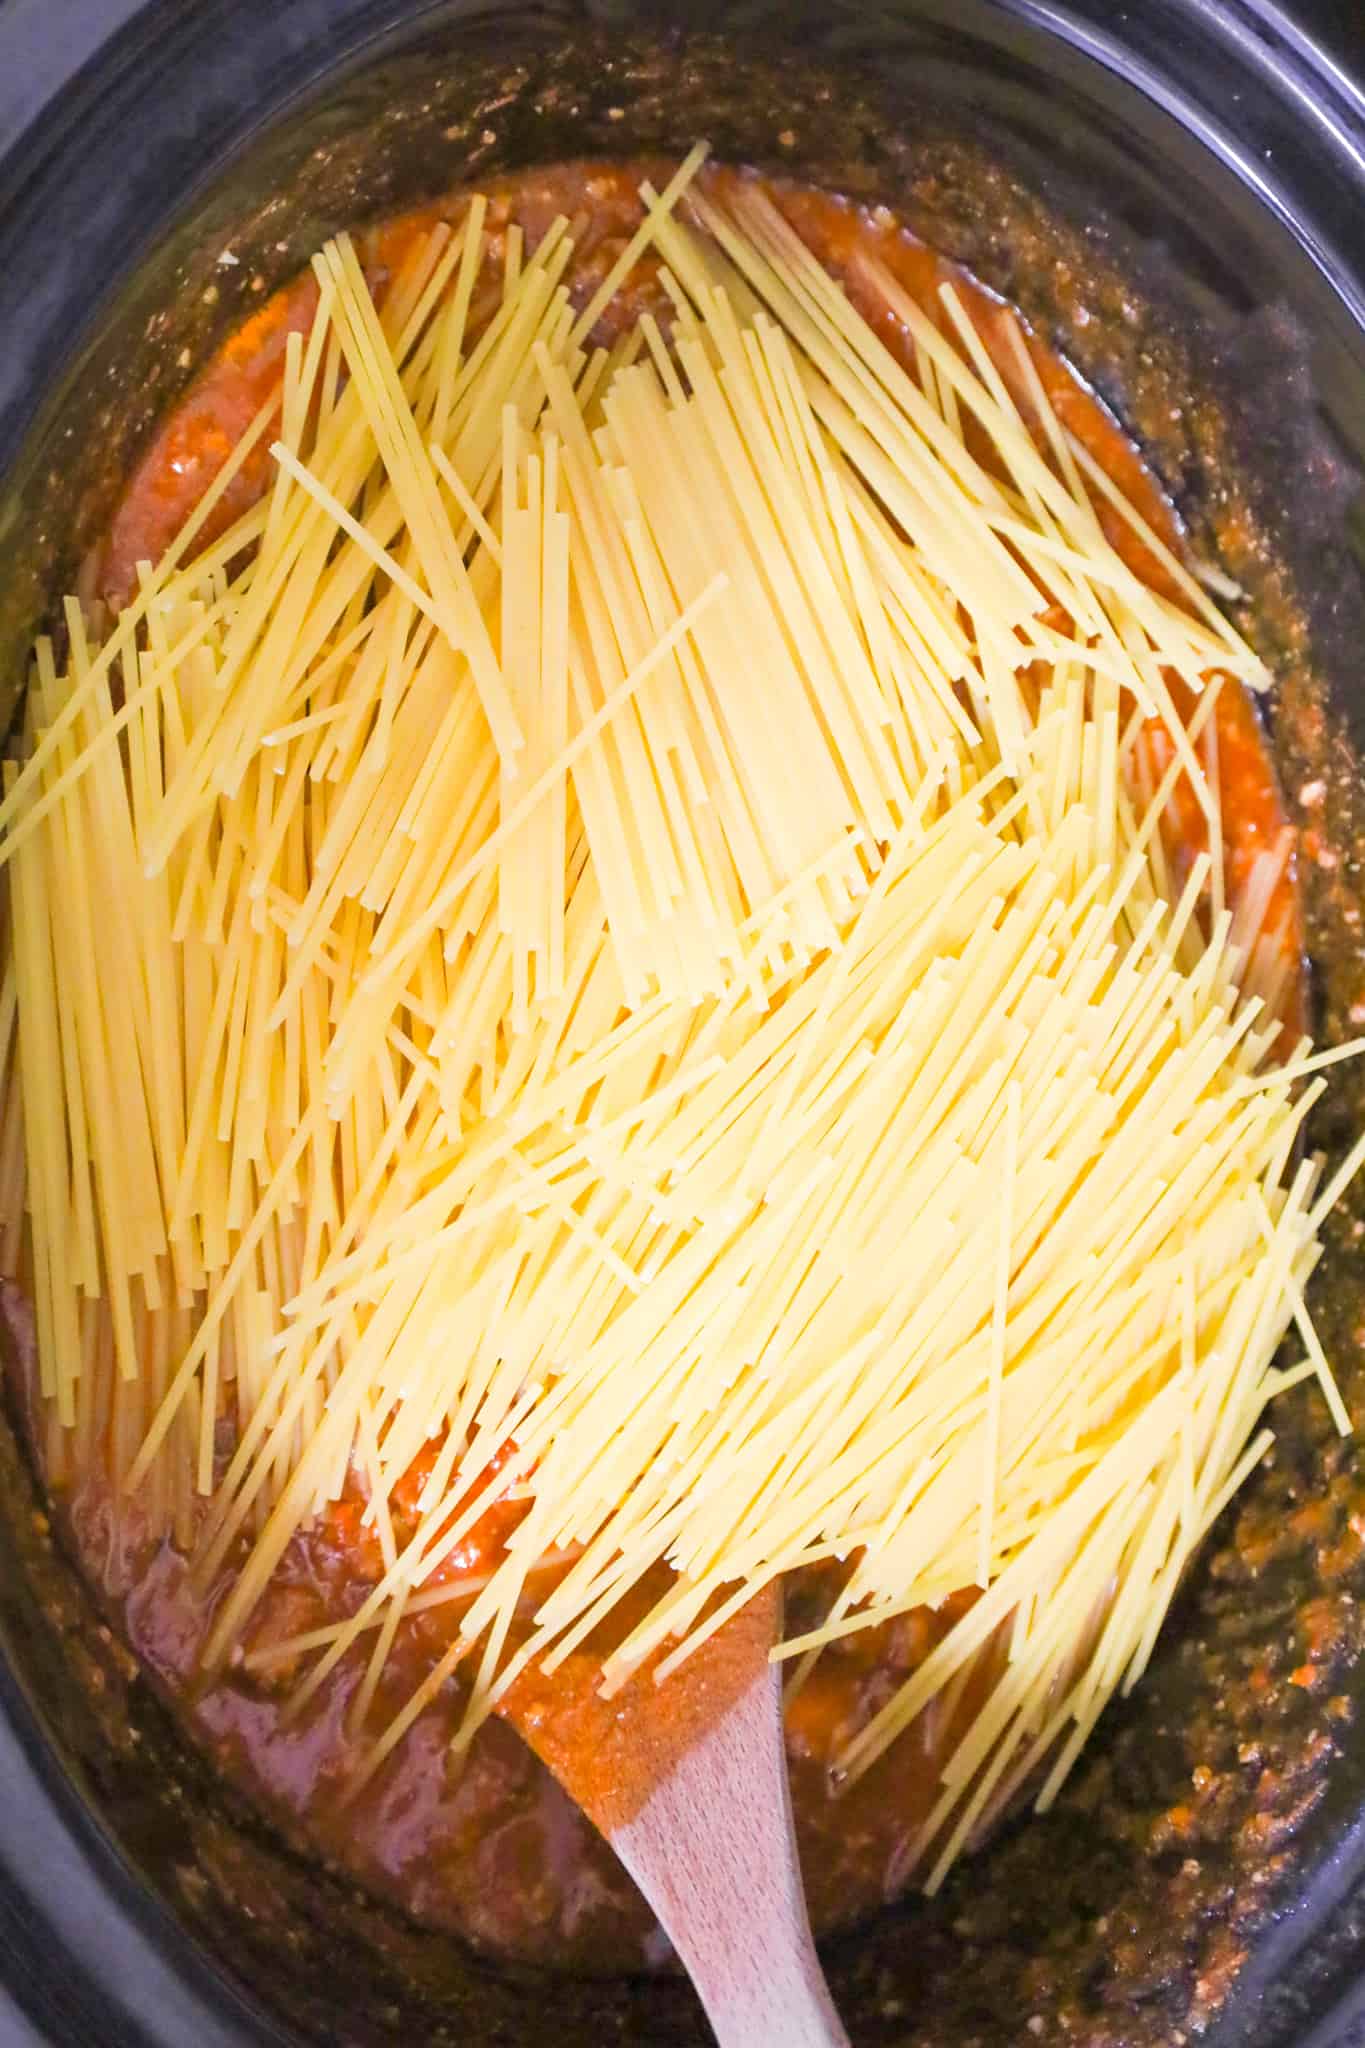 uncooked spaghetti noodles on top of marinara sauce in a crock pot